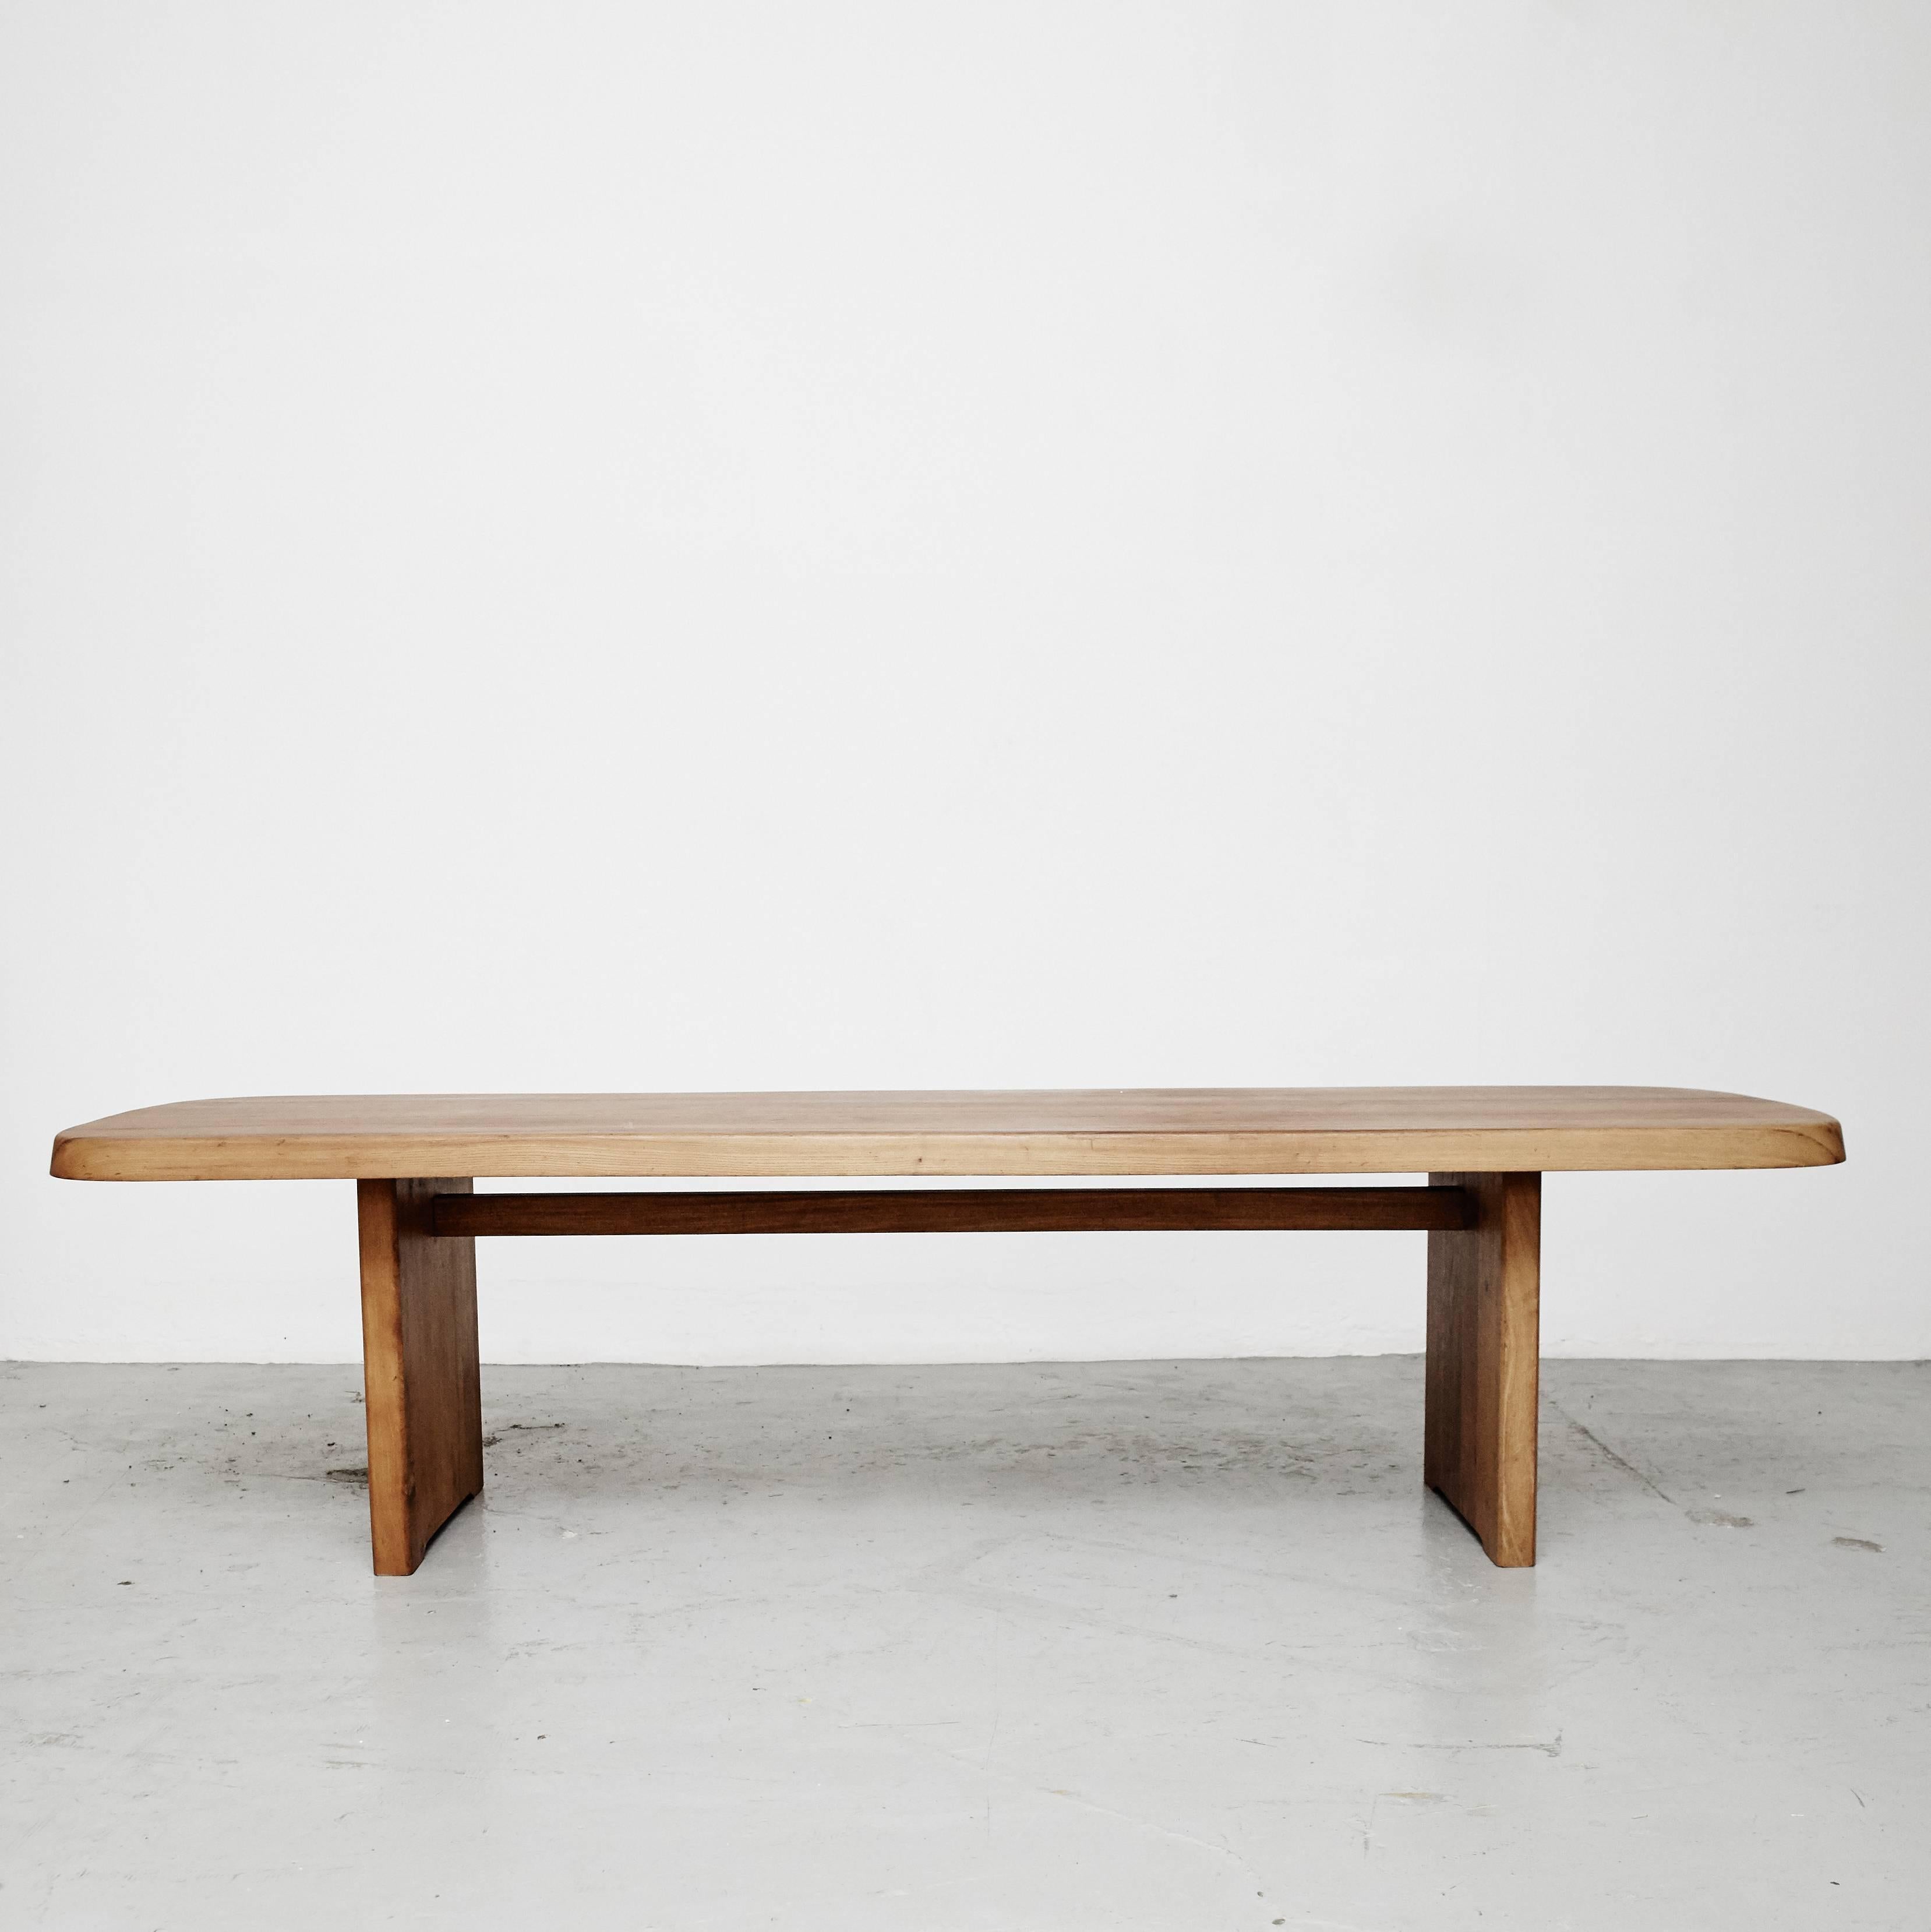 T20 Dining table designed by Pierre Chapo.
Manufactured by Pierre Chapo (France), circa 1960.
Solid elmwood.

Dimensions dining table: 73 cm H x 139 cm W x 69 cm D.

In good original condition, with minor wear consistent with age and use,